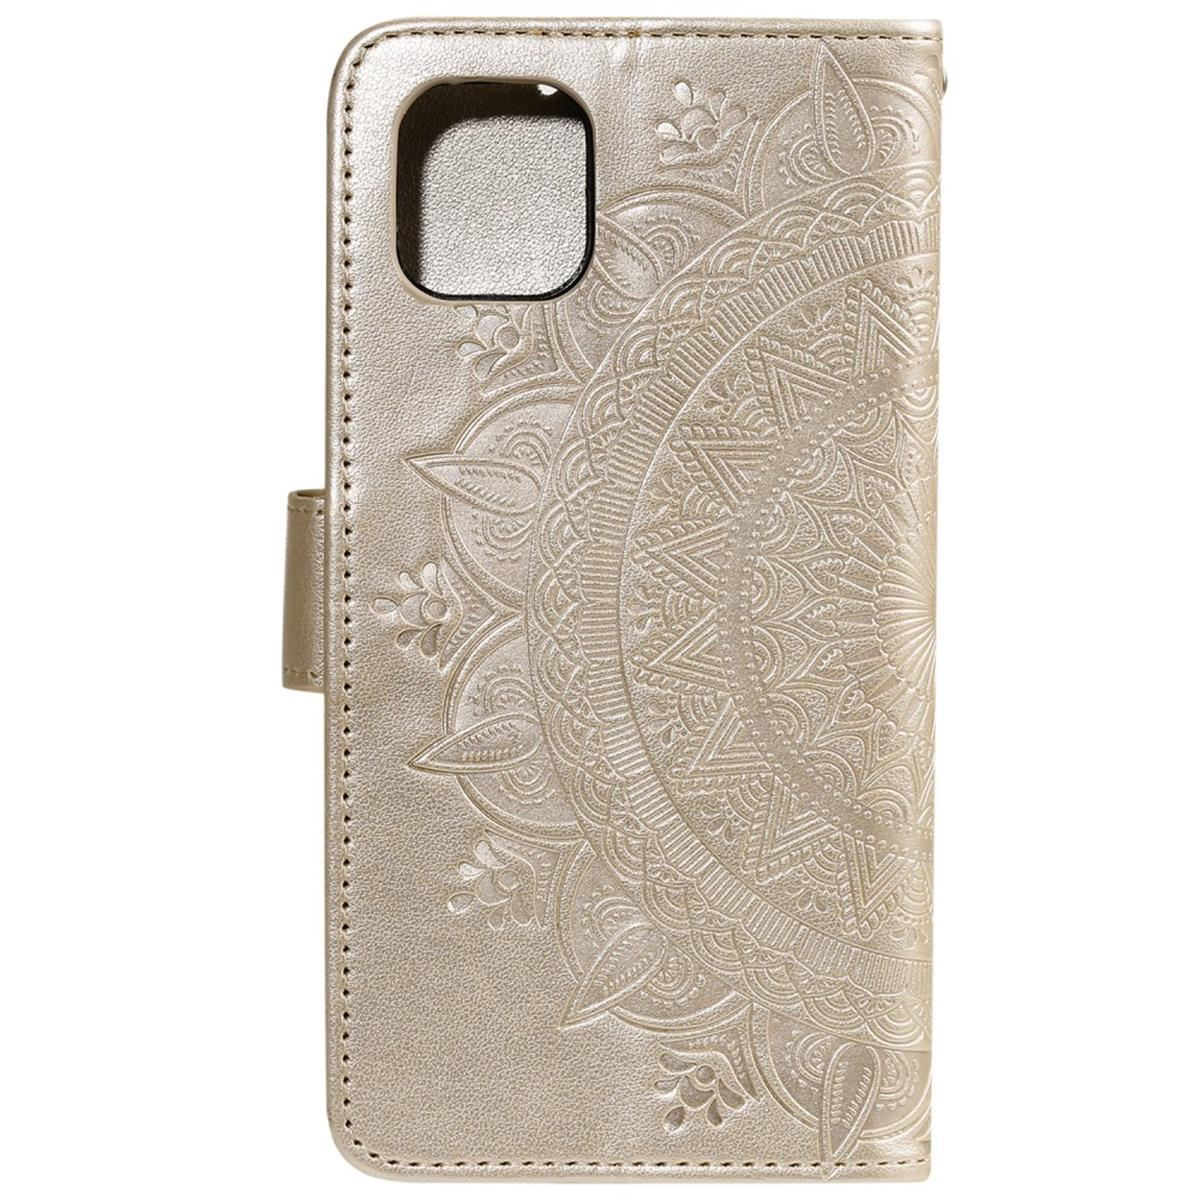 COVERKINGZ Klapphülle 11 Bookcover, iPhone Apple, mit Gold Muster, Pro, Mandala